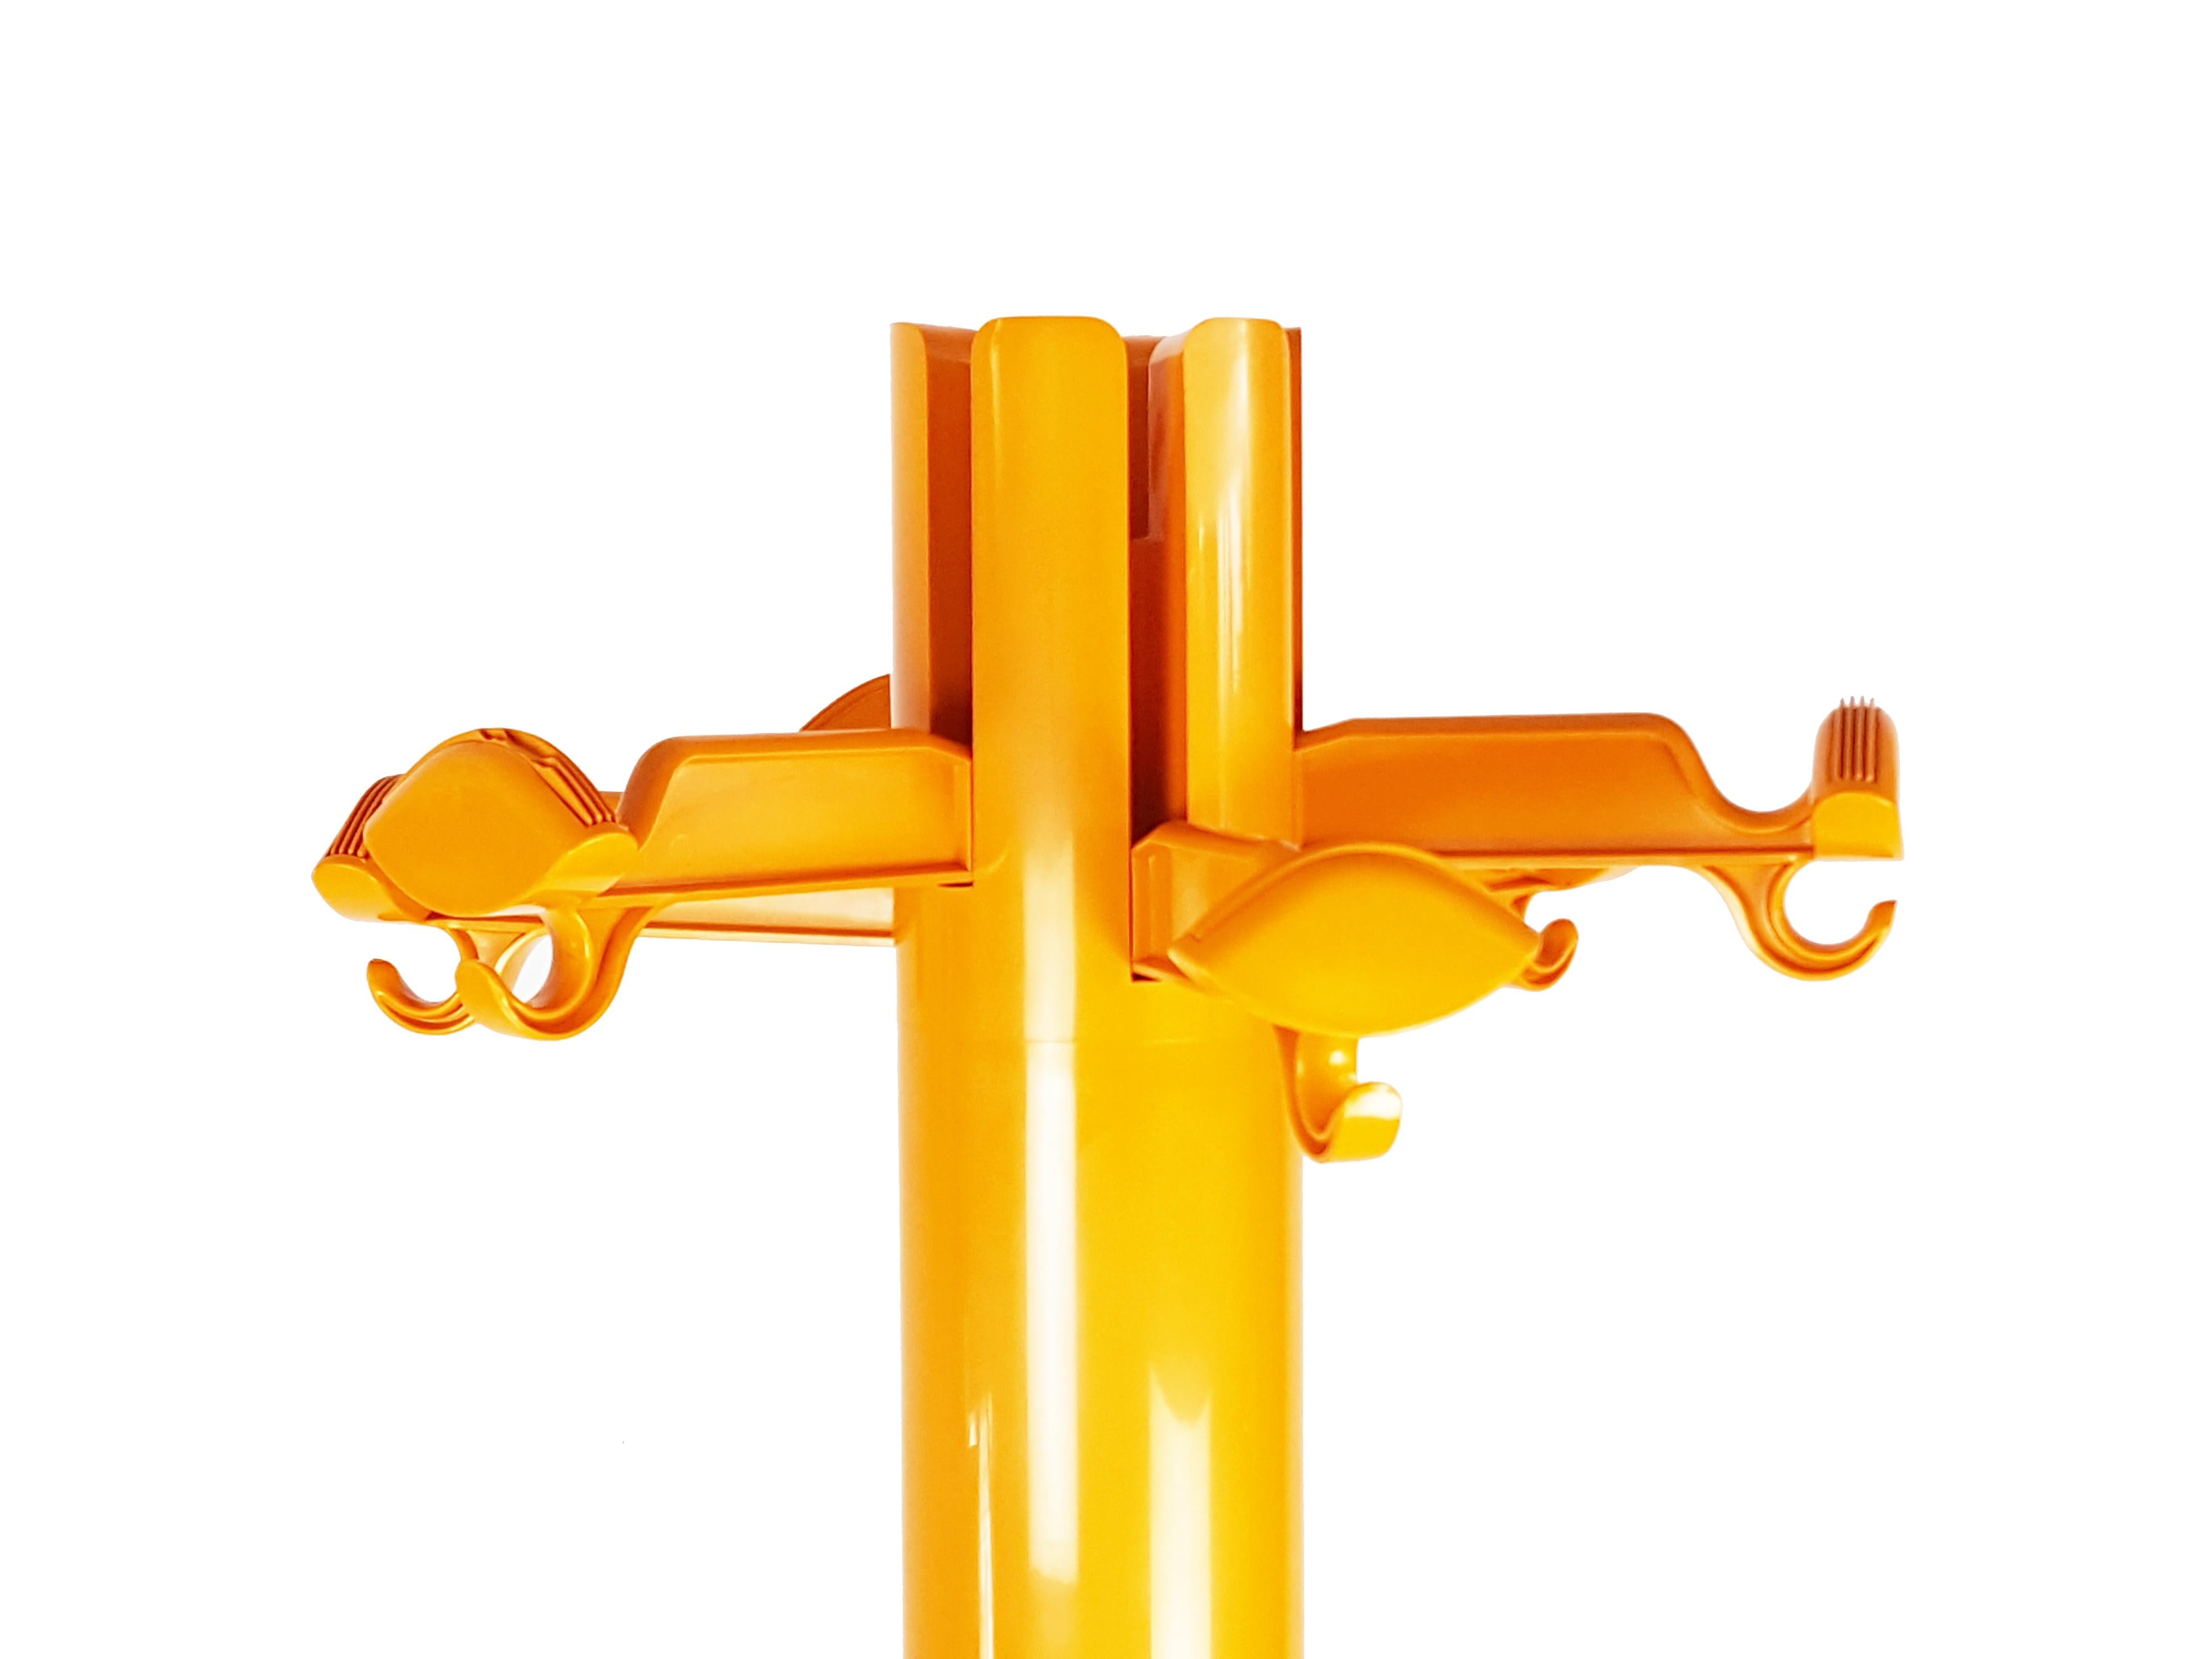 Orange plastic free standing coat rack with folding hooks & umbrella holders. Overall good condition: normal signs of wear and light scratches. One plastic breackage visible along the rod.